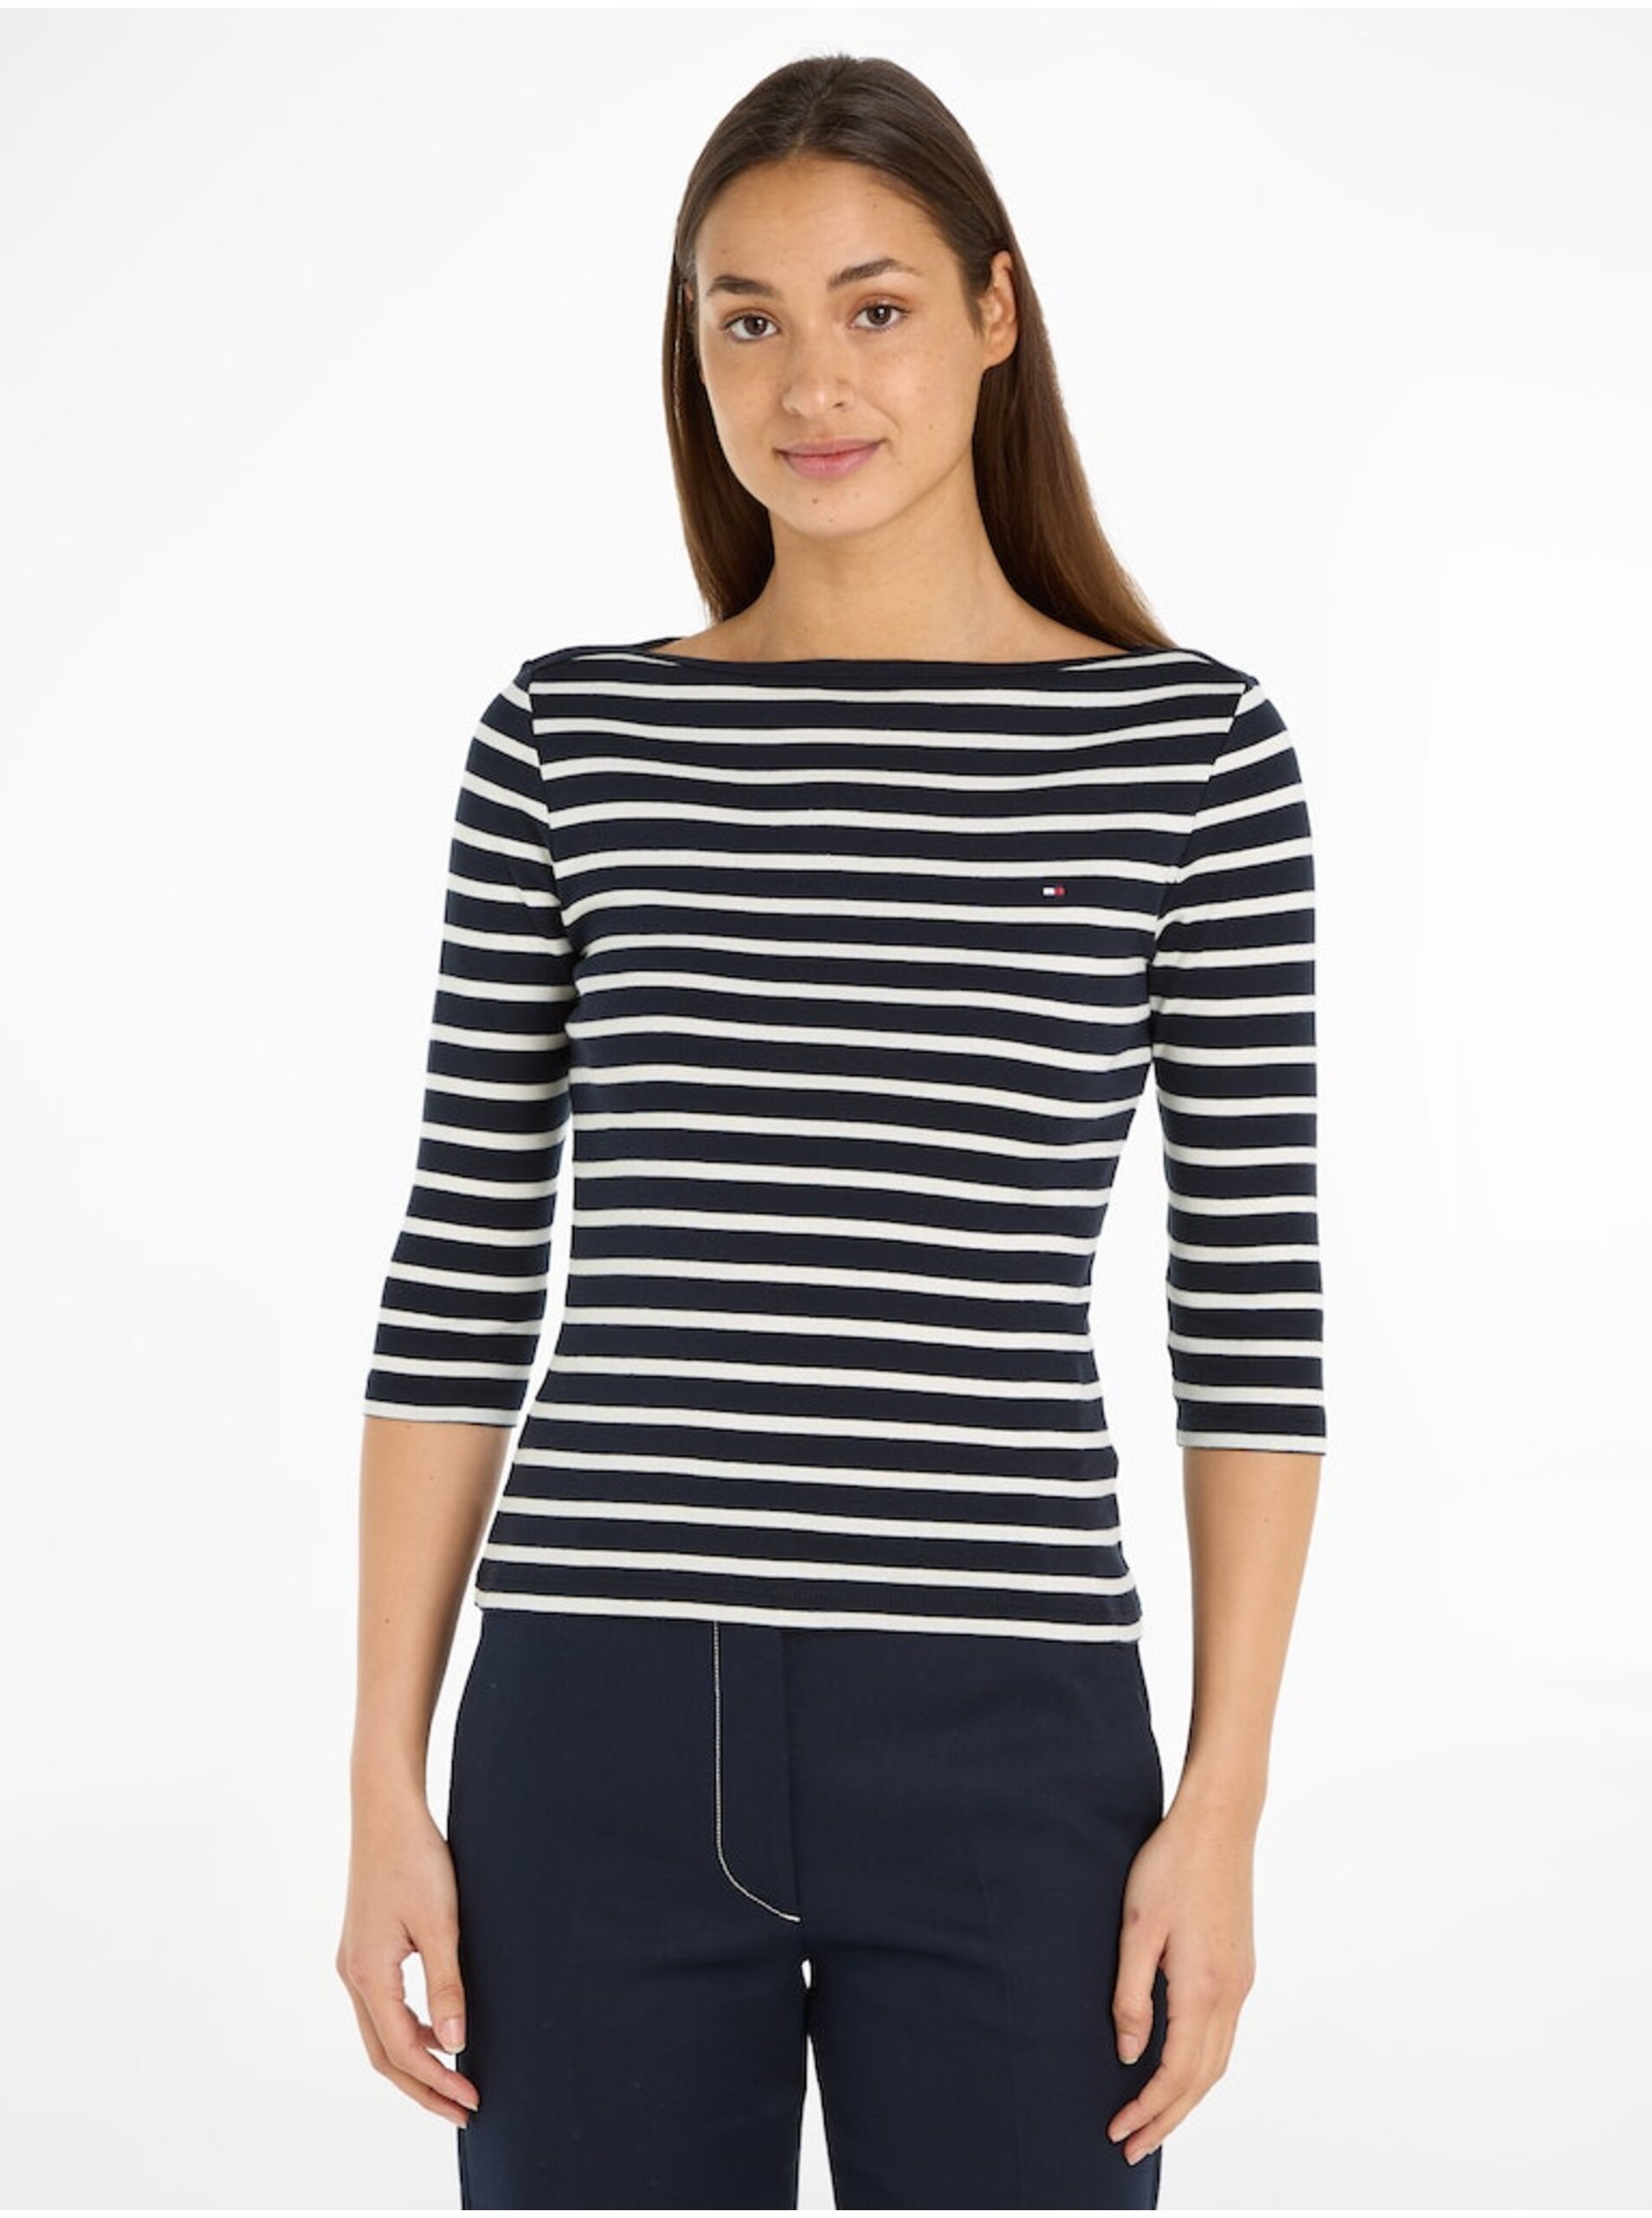 White and Blue Women's Striped T-Shirt Tommy Hilfiger New Cody - Women